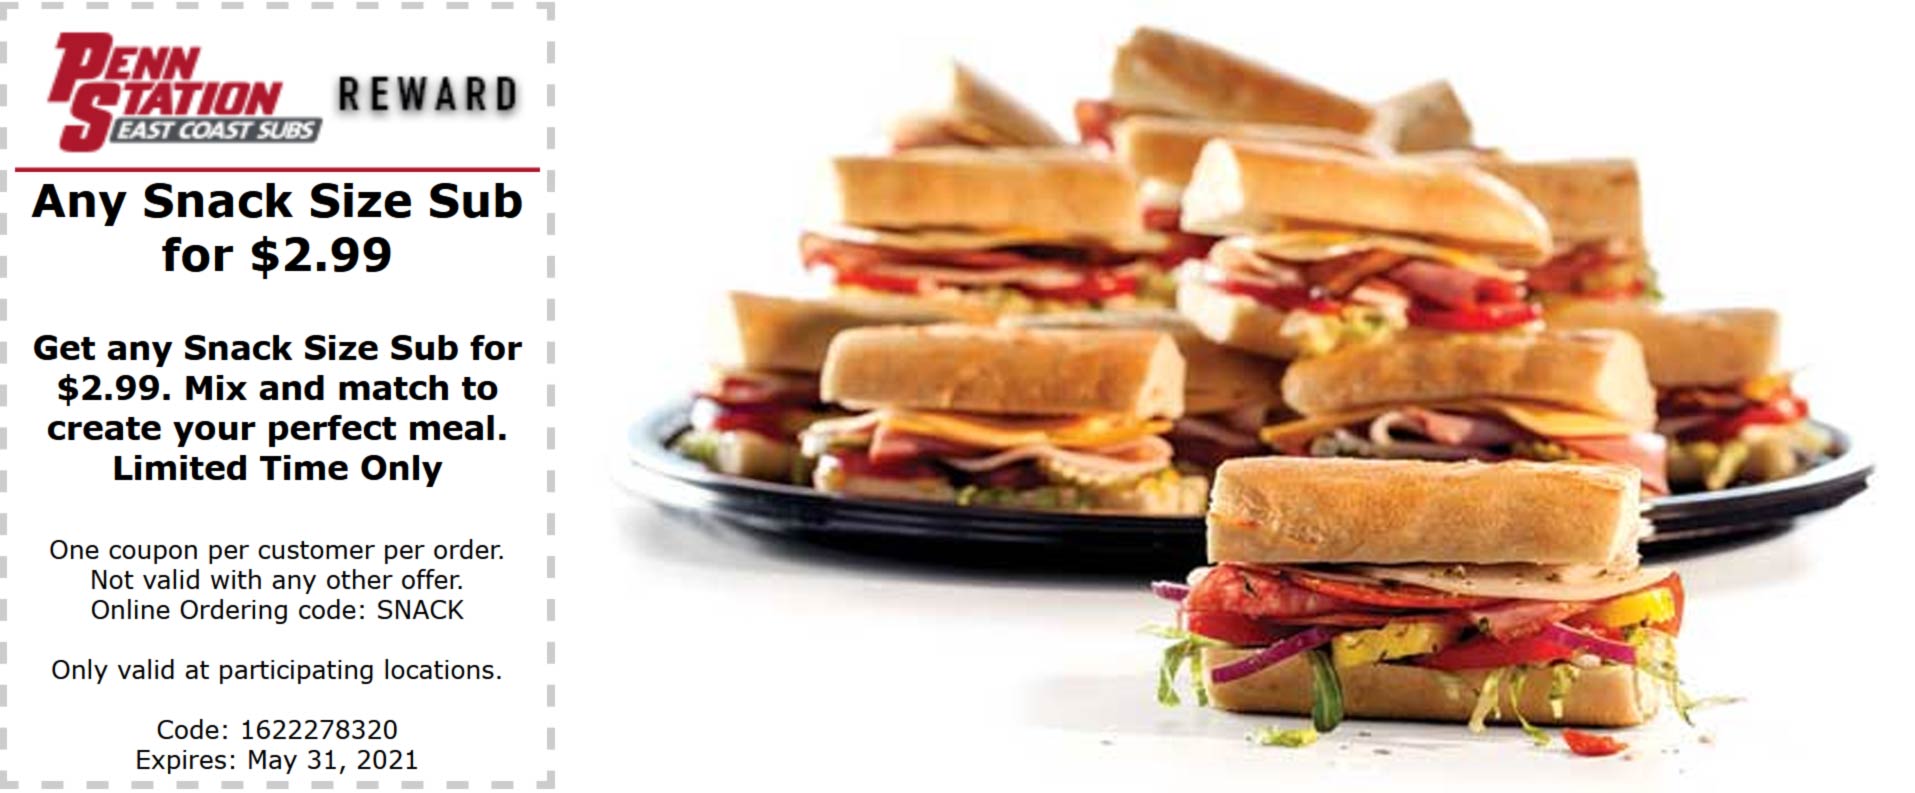 [August, 2021] $3 snack size sub sandwiches at Penn Station restaurants